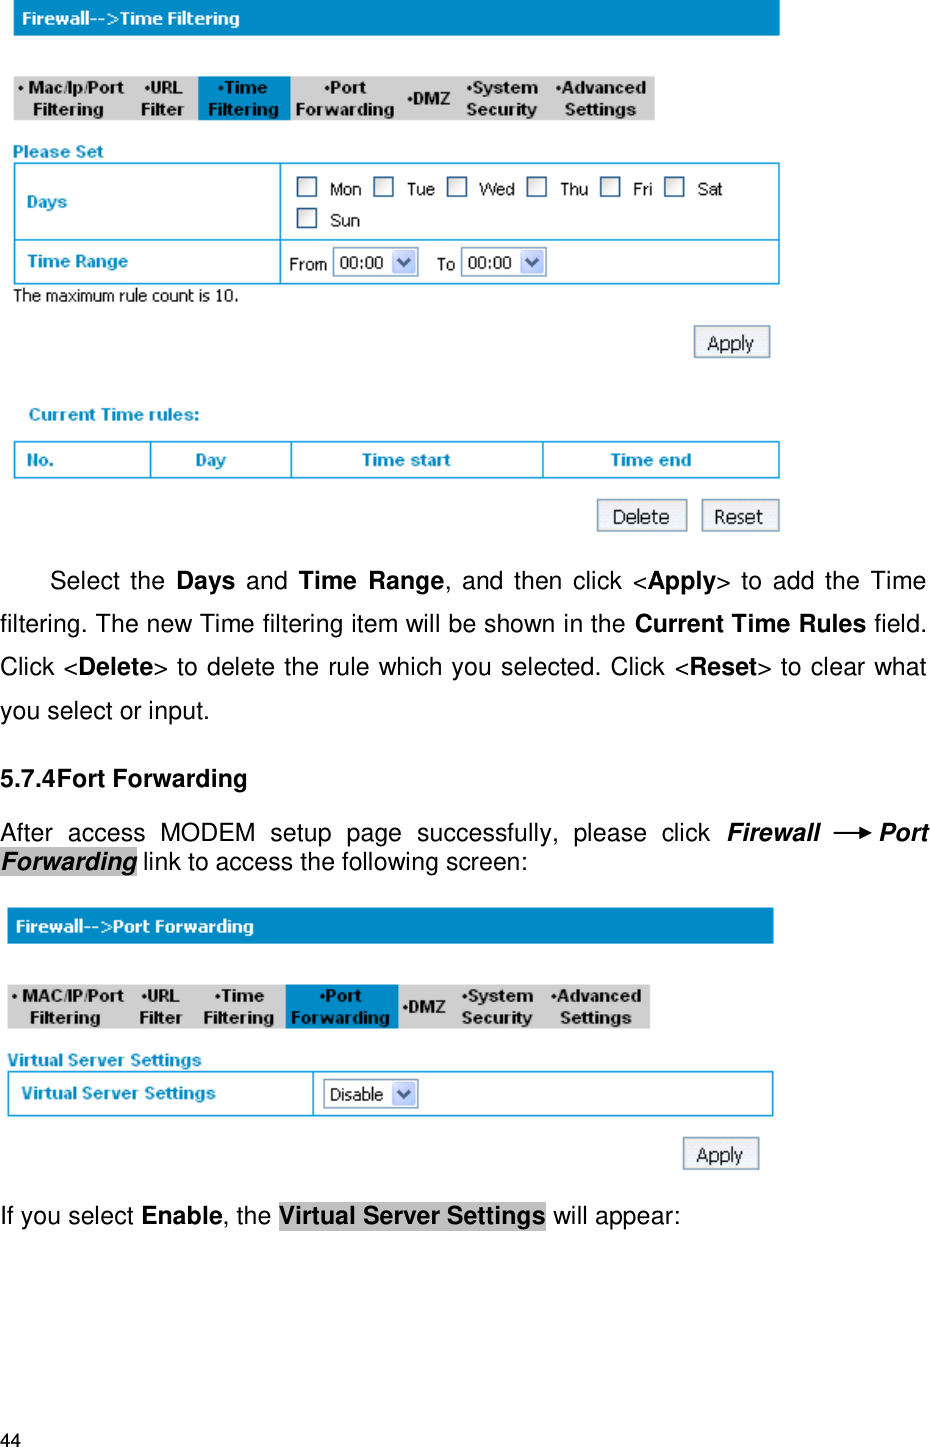 44  Select  the  Days and Time Range,  and then click &lt;Apply&gt; to add the Time filtering. The new Time filtering item will be shown in the Current Time Rules field. Click &lt;Delete&gt; to delete the rule which you selected. Click &lt;Reset&gt; to clear what you select or input. 5.7.4 Fort Forwarding After  access  MODEM  setup  page  successfully,  please  click  Firewall  Port Forwarding link to access the following screen:  If you select Enable, the Virtual Server Settings will appear: 